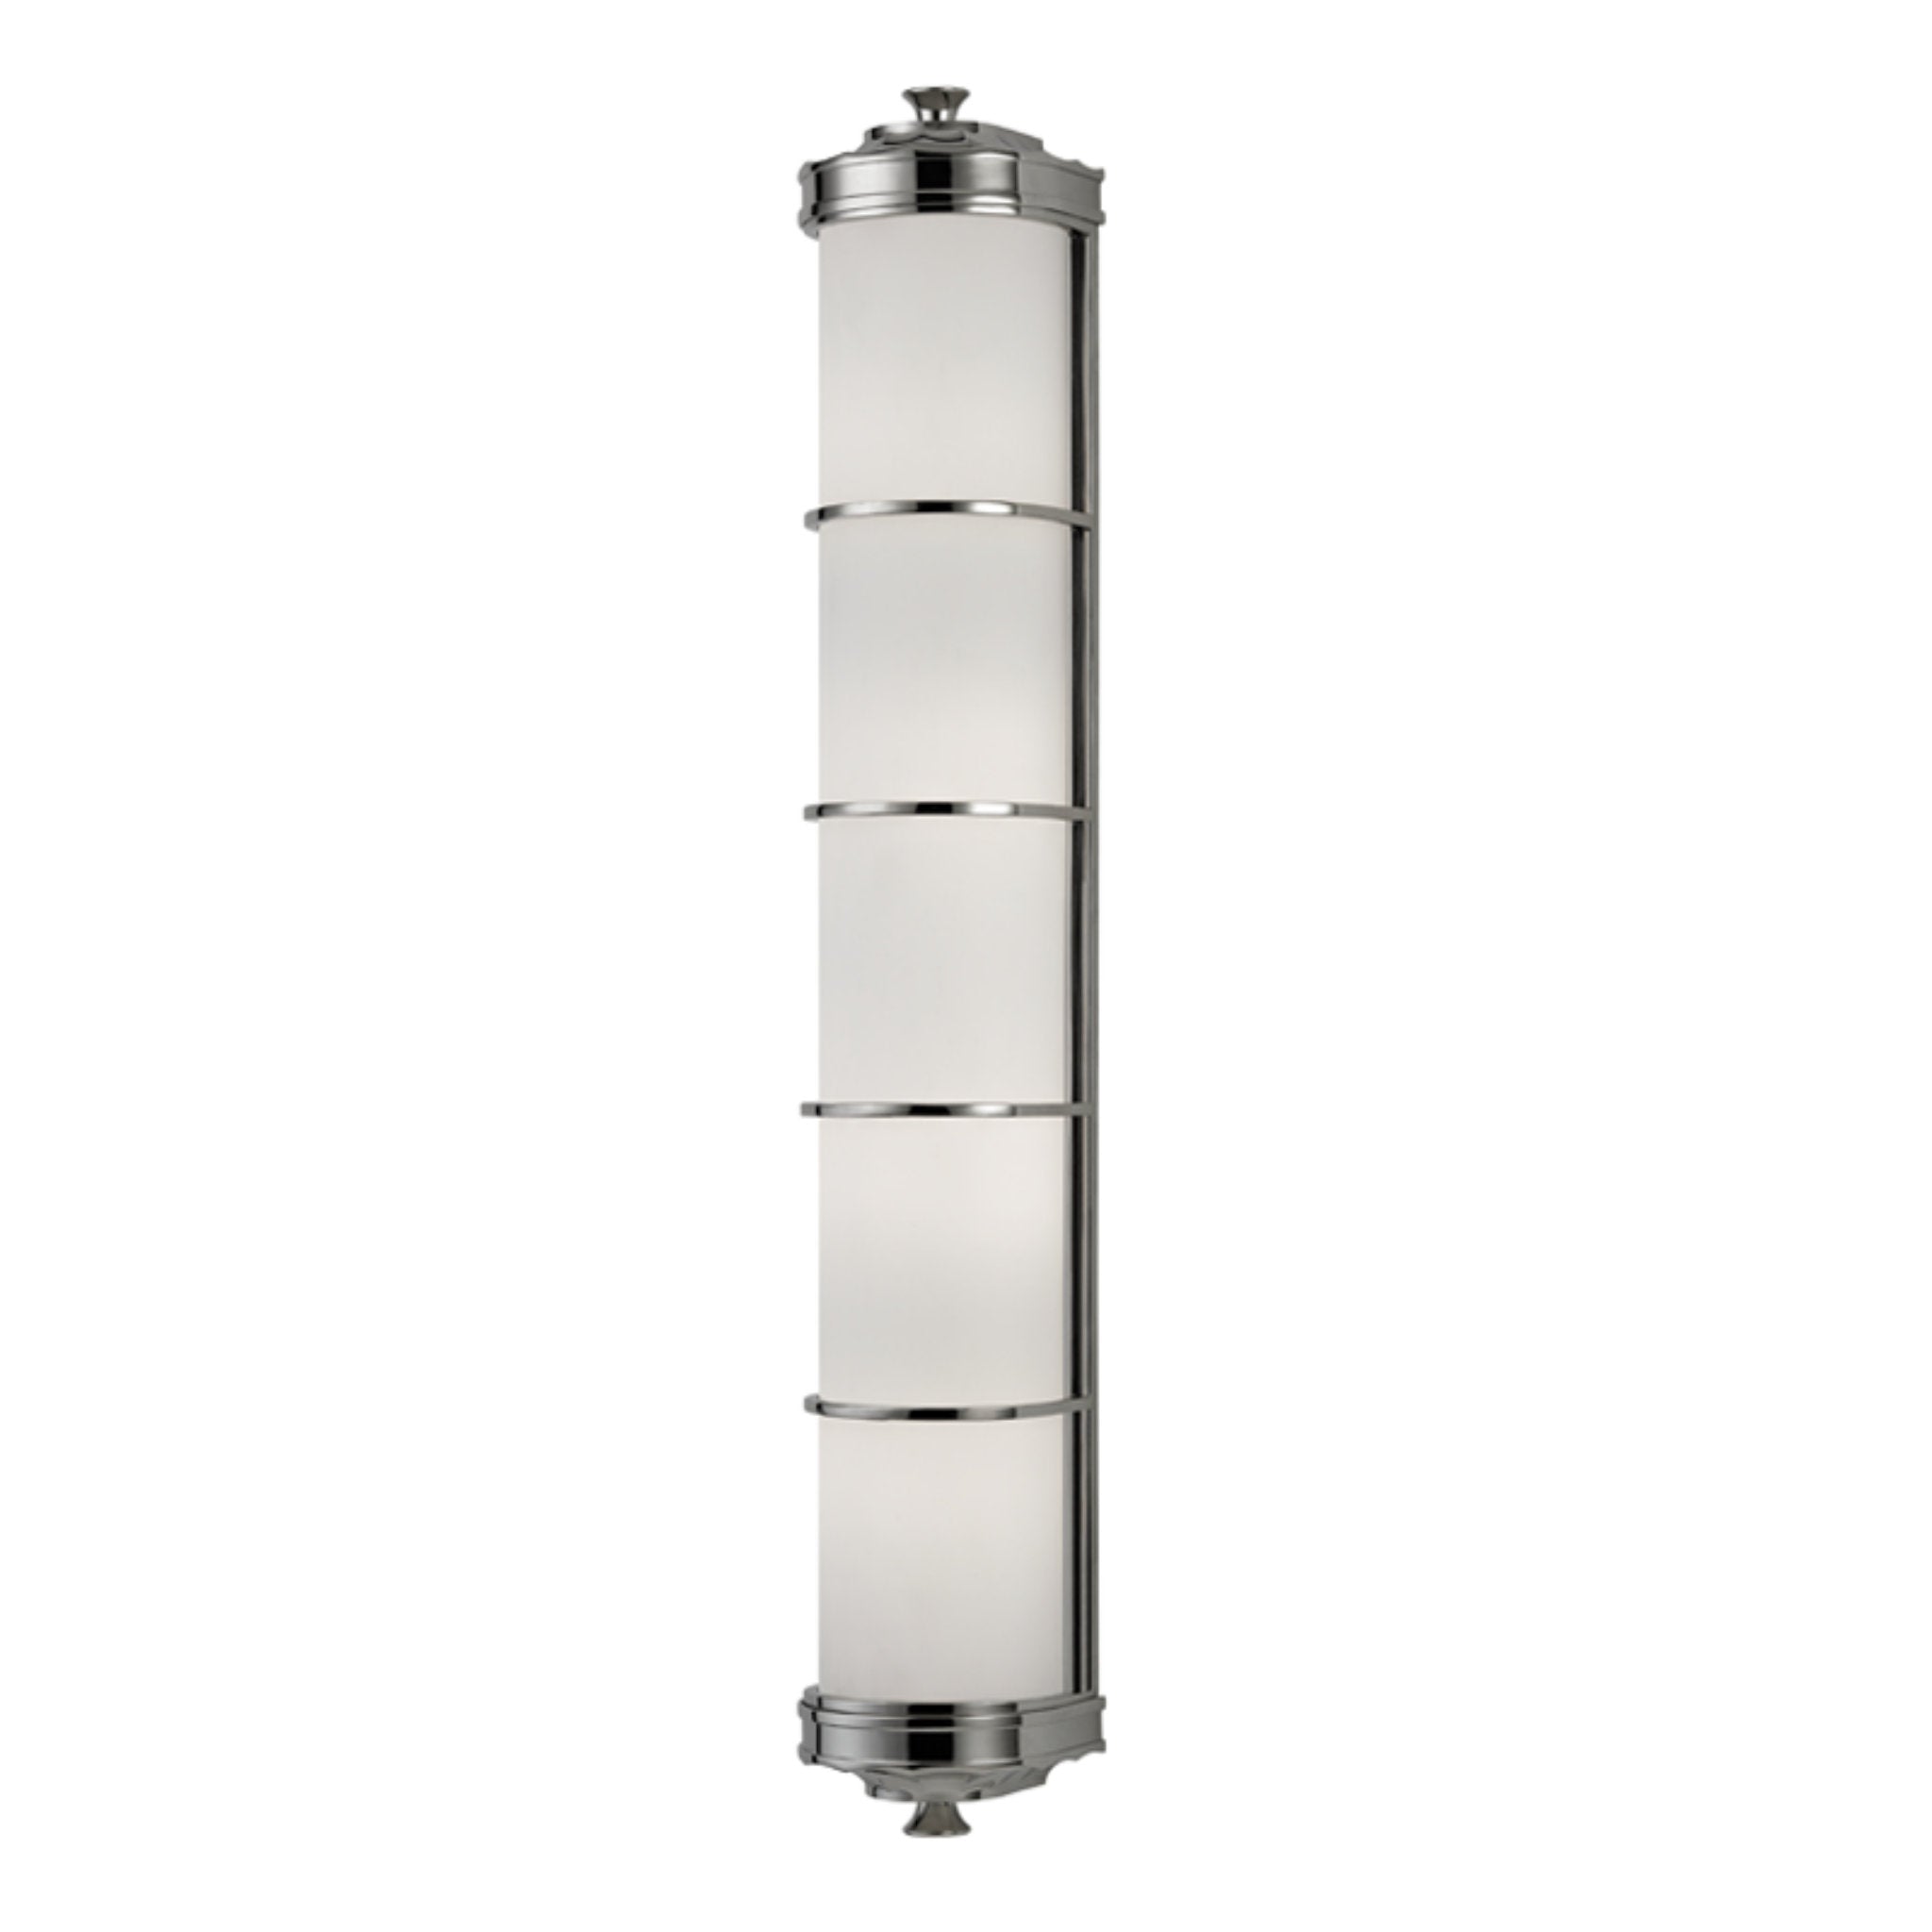 Albany 4 Light Wall Sconce in Polished Nickel